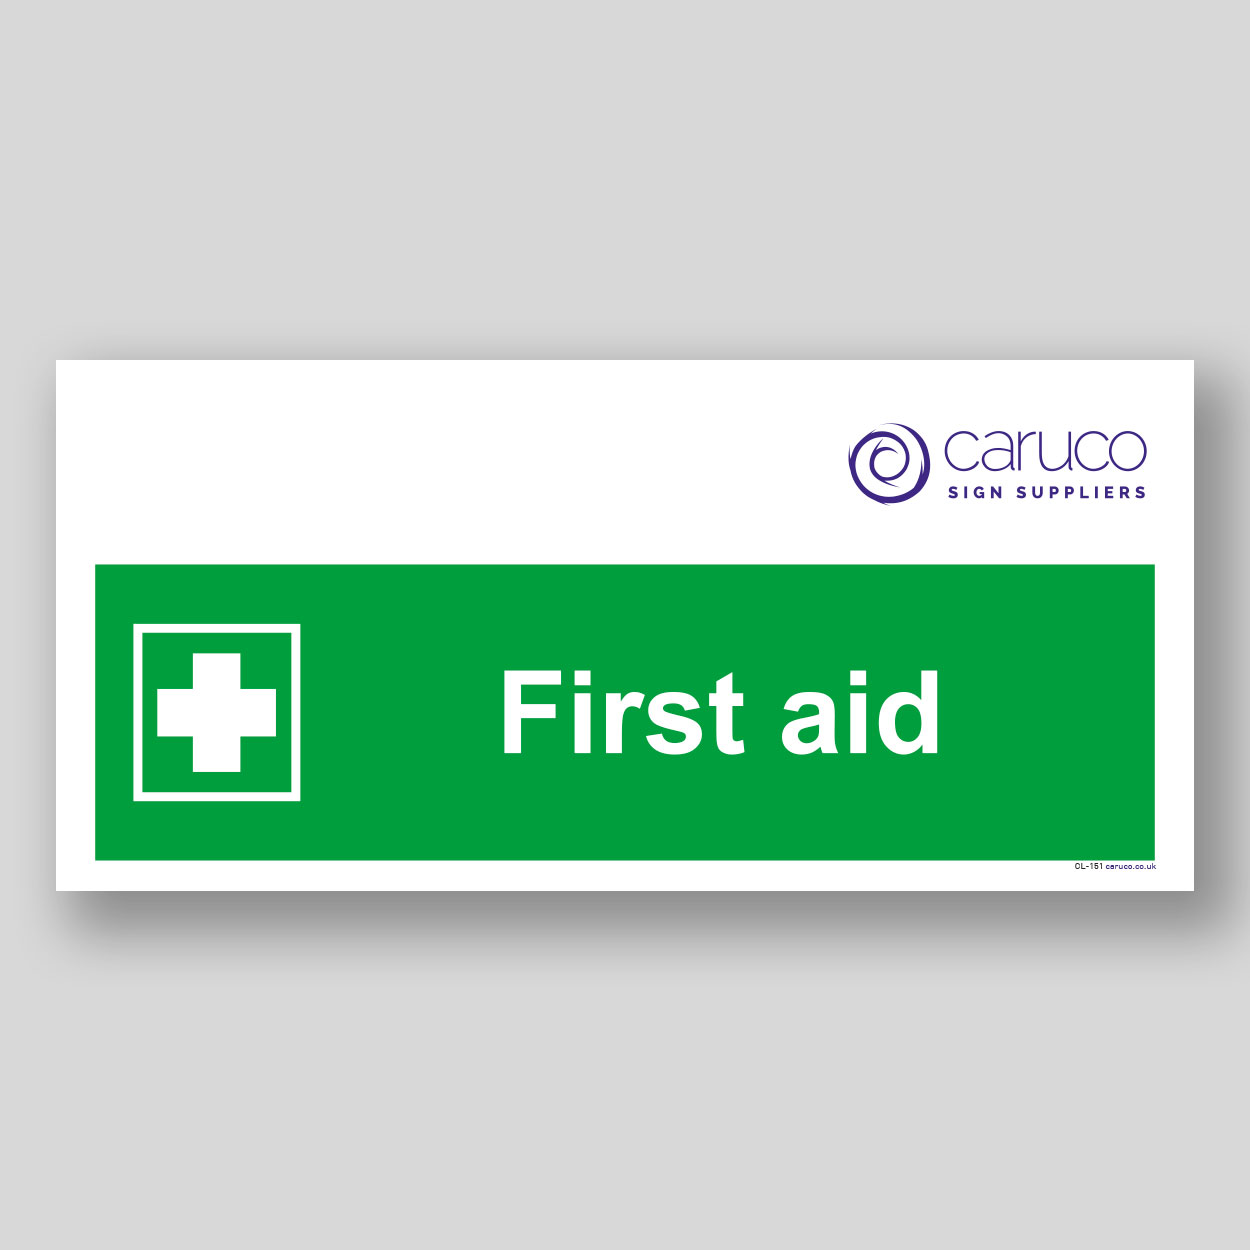 CL-151 First aid